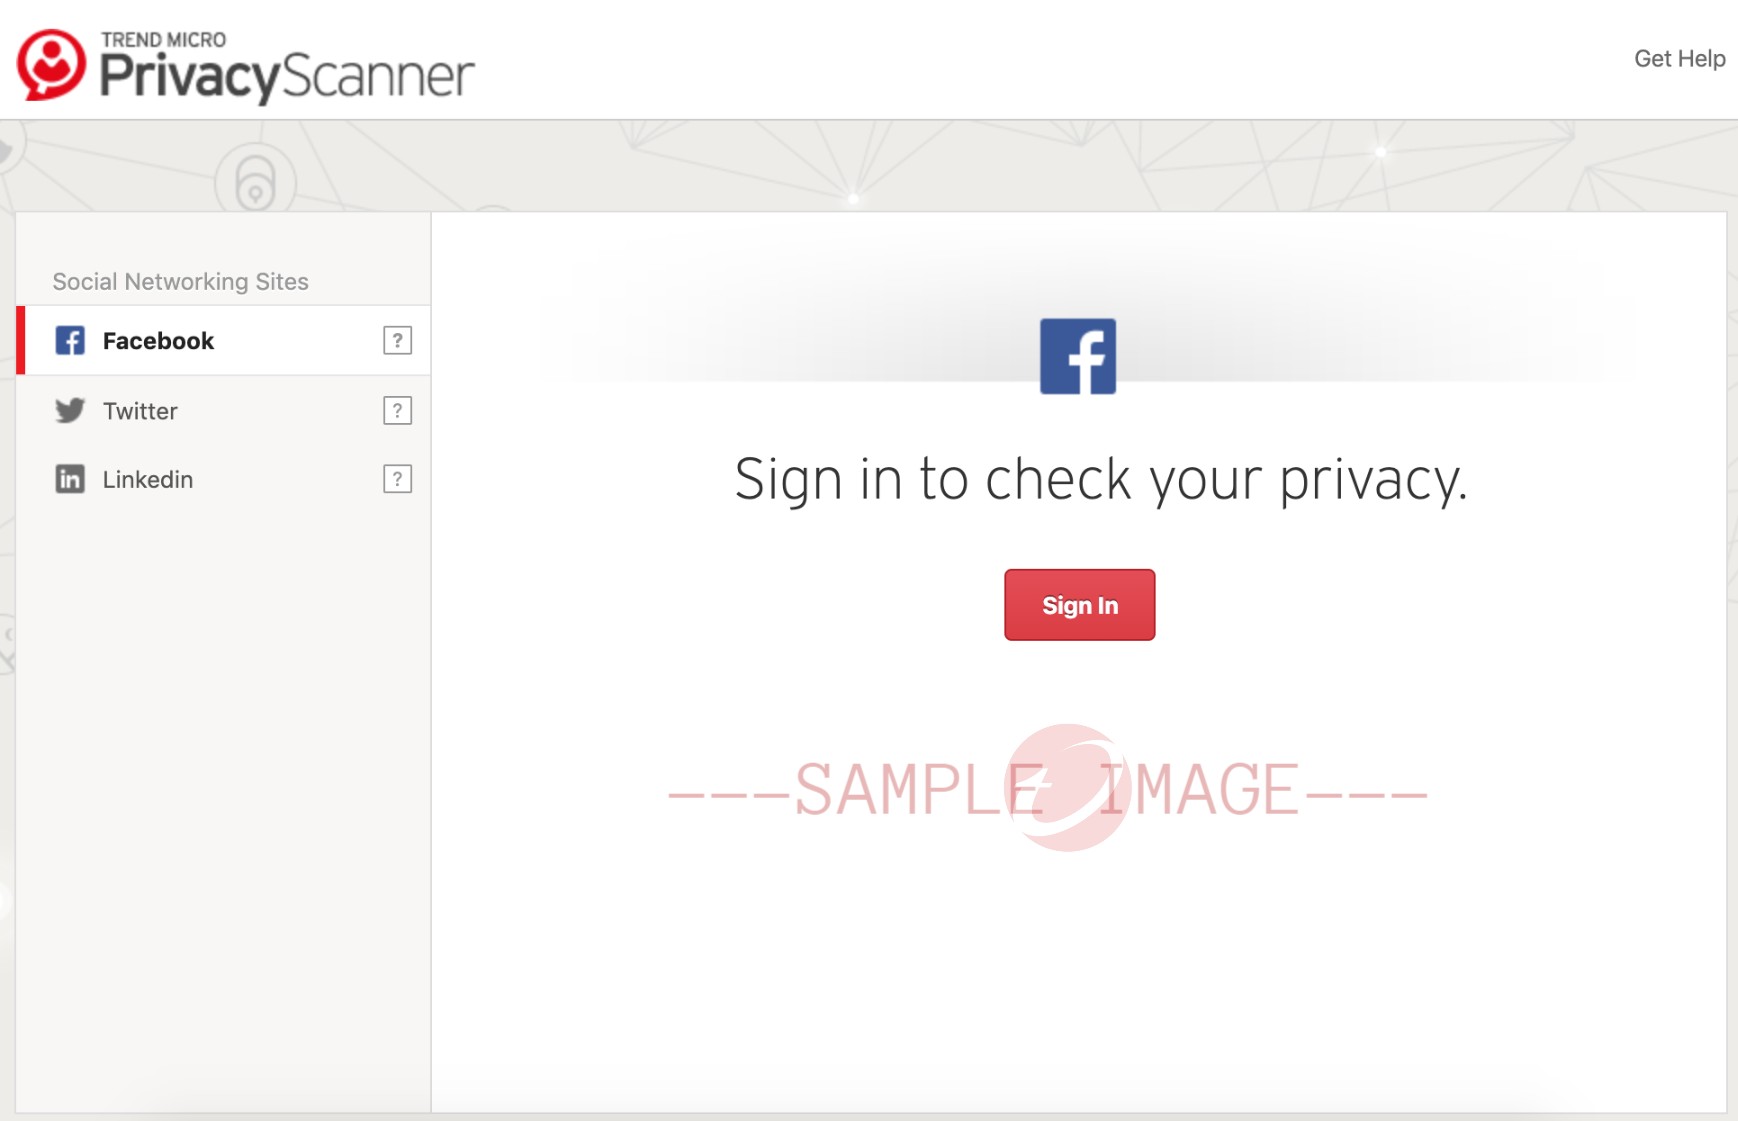 Sign in to check your privacy Trend Micro Privacy Scanner